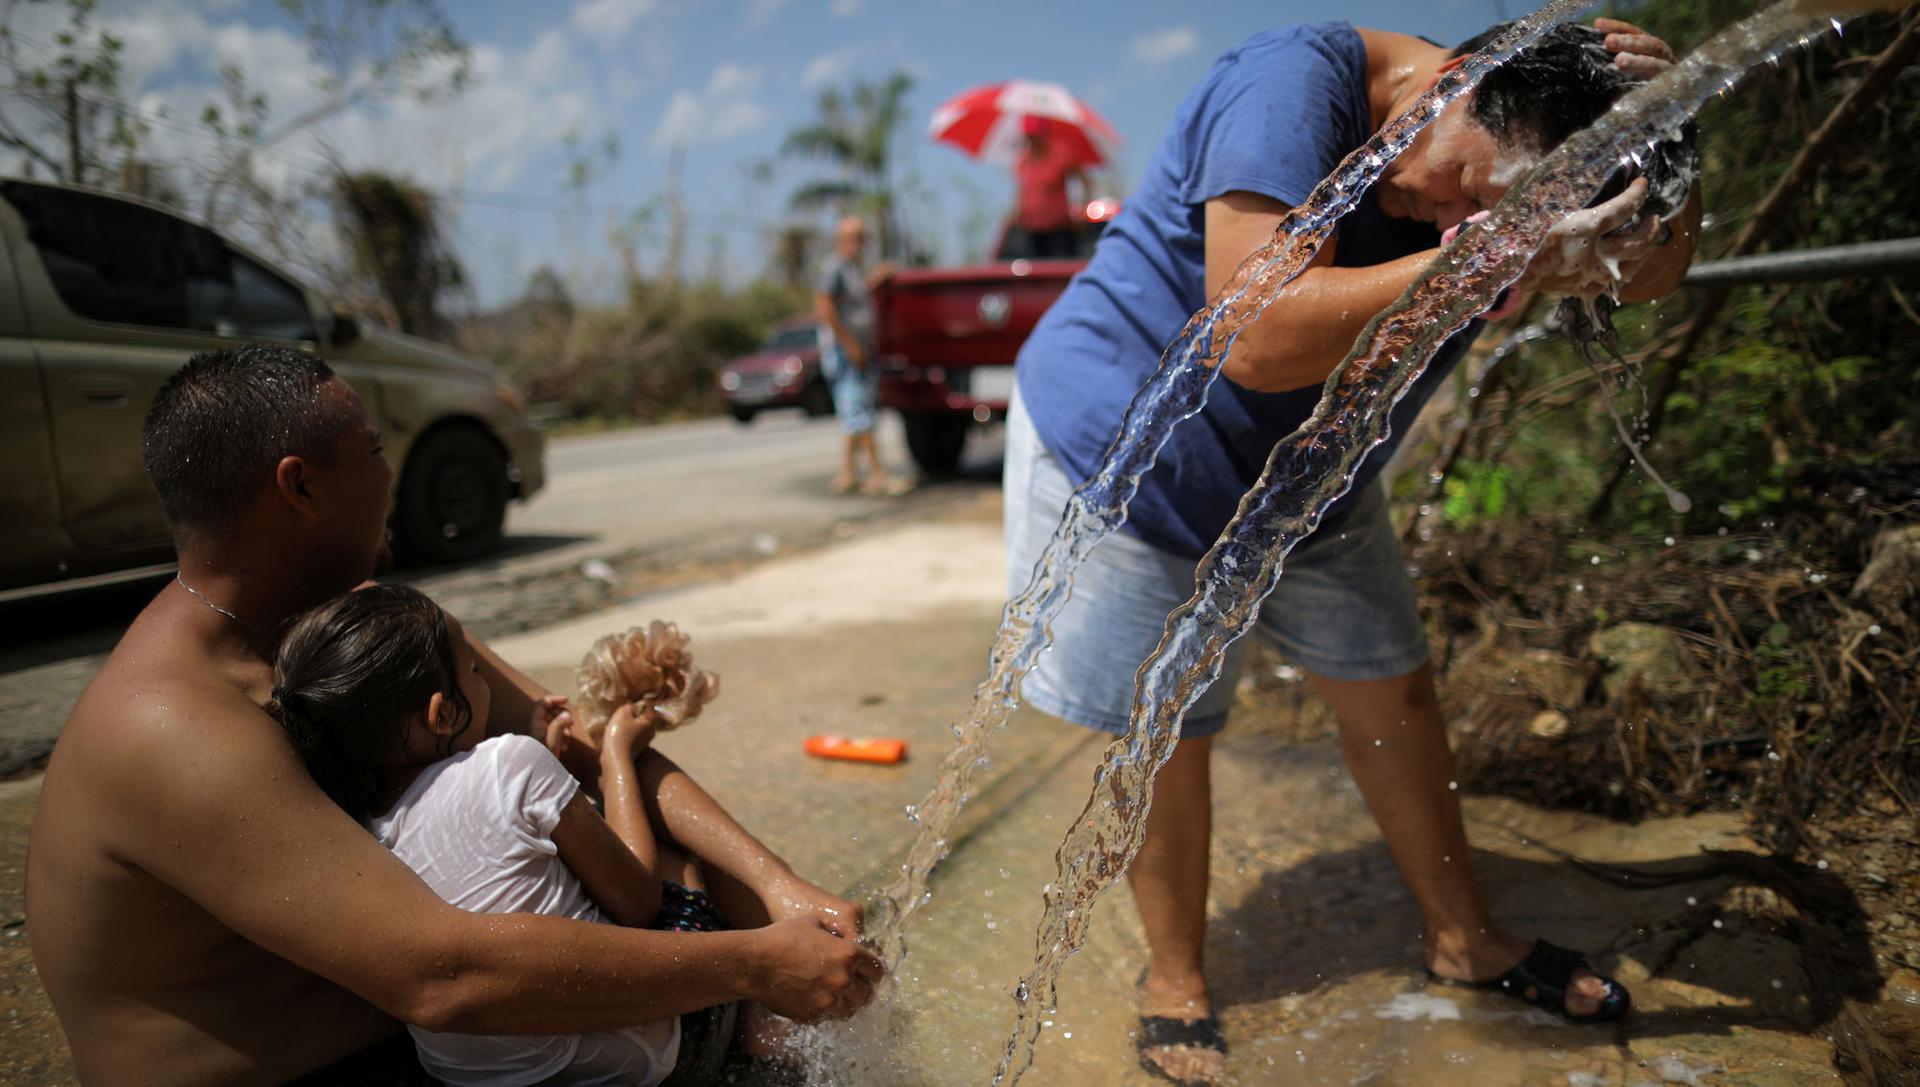 Water falls from a pipe onto the street. A woman in the background is bent at the waist and washes her hair in the running water, while a man holds a child and watches the woman. 